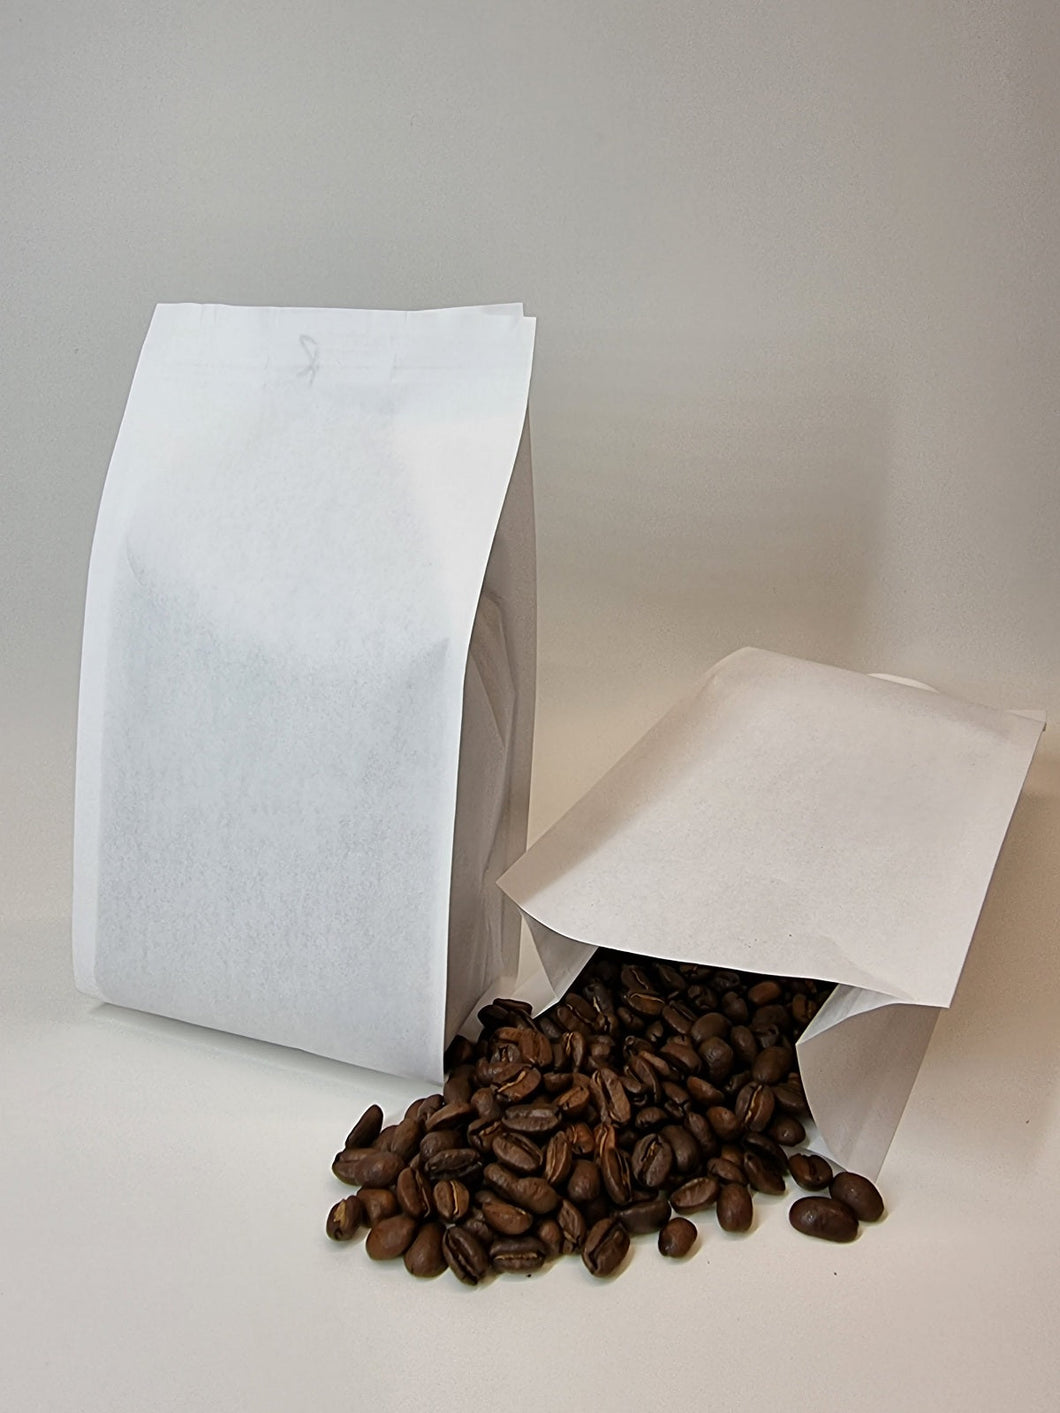 EmberPack™ Coffee 250g Recyclable Paper Bag: 100 Bags Packing Materials EmberPack by EAM 